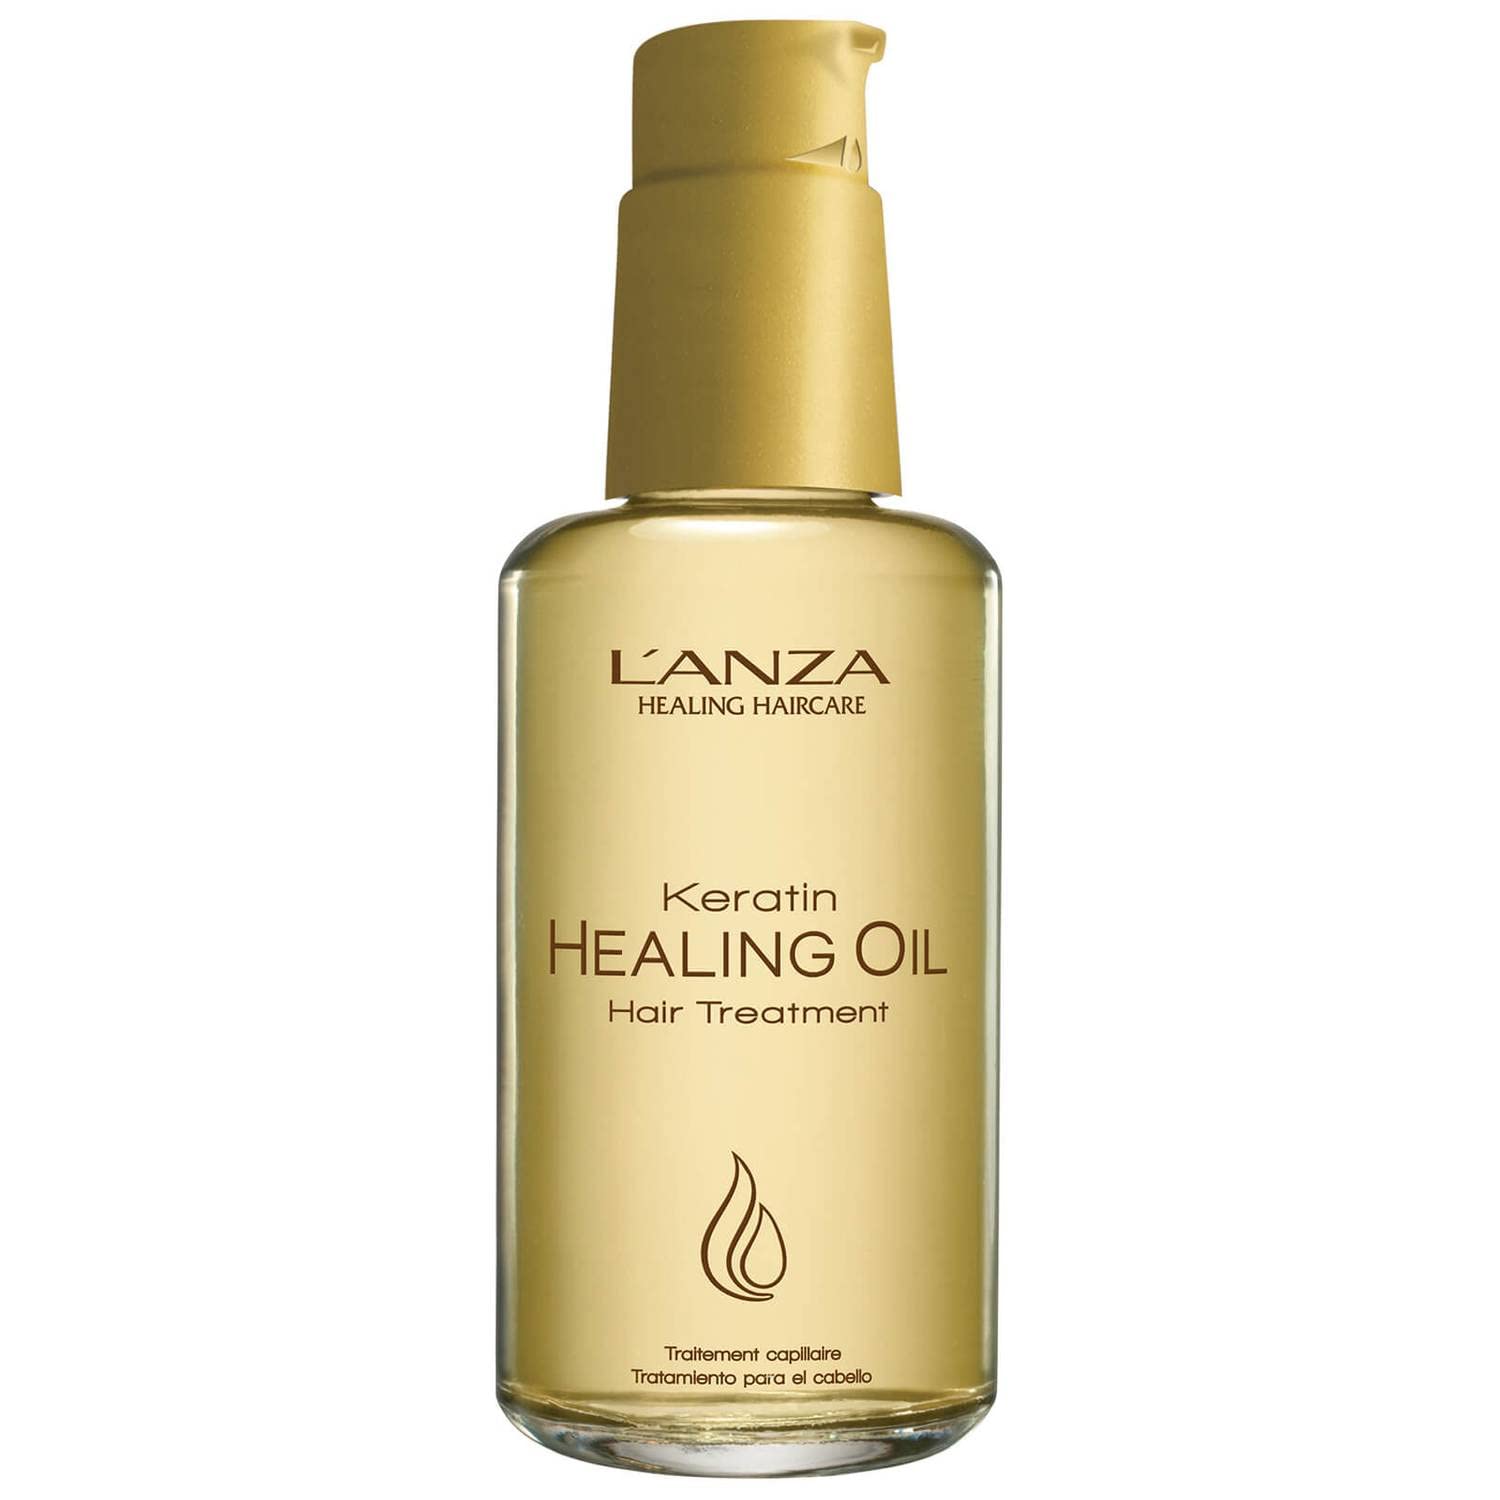 L'ANZA Keratin Healing Oil Treatment - Restores, Revives, and Nourishes Dry Damaged Hair & Scalp, With Restorative Phyto IV Complex, Protein, and UV Protection